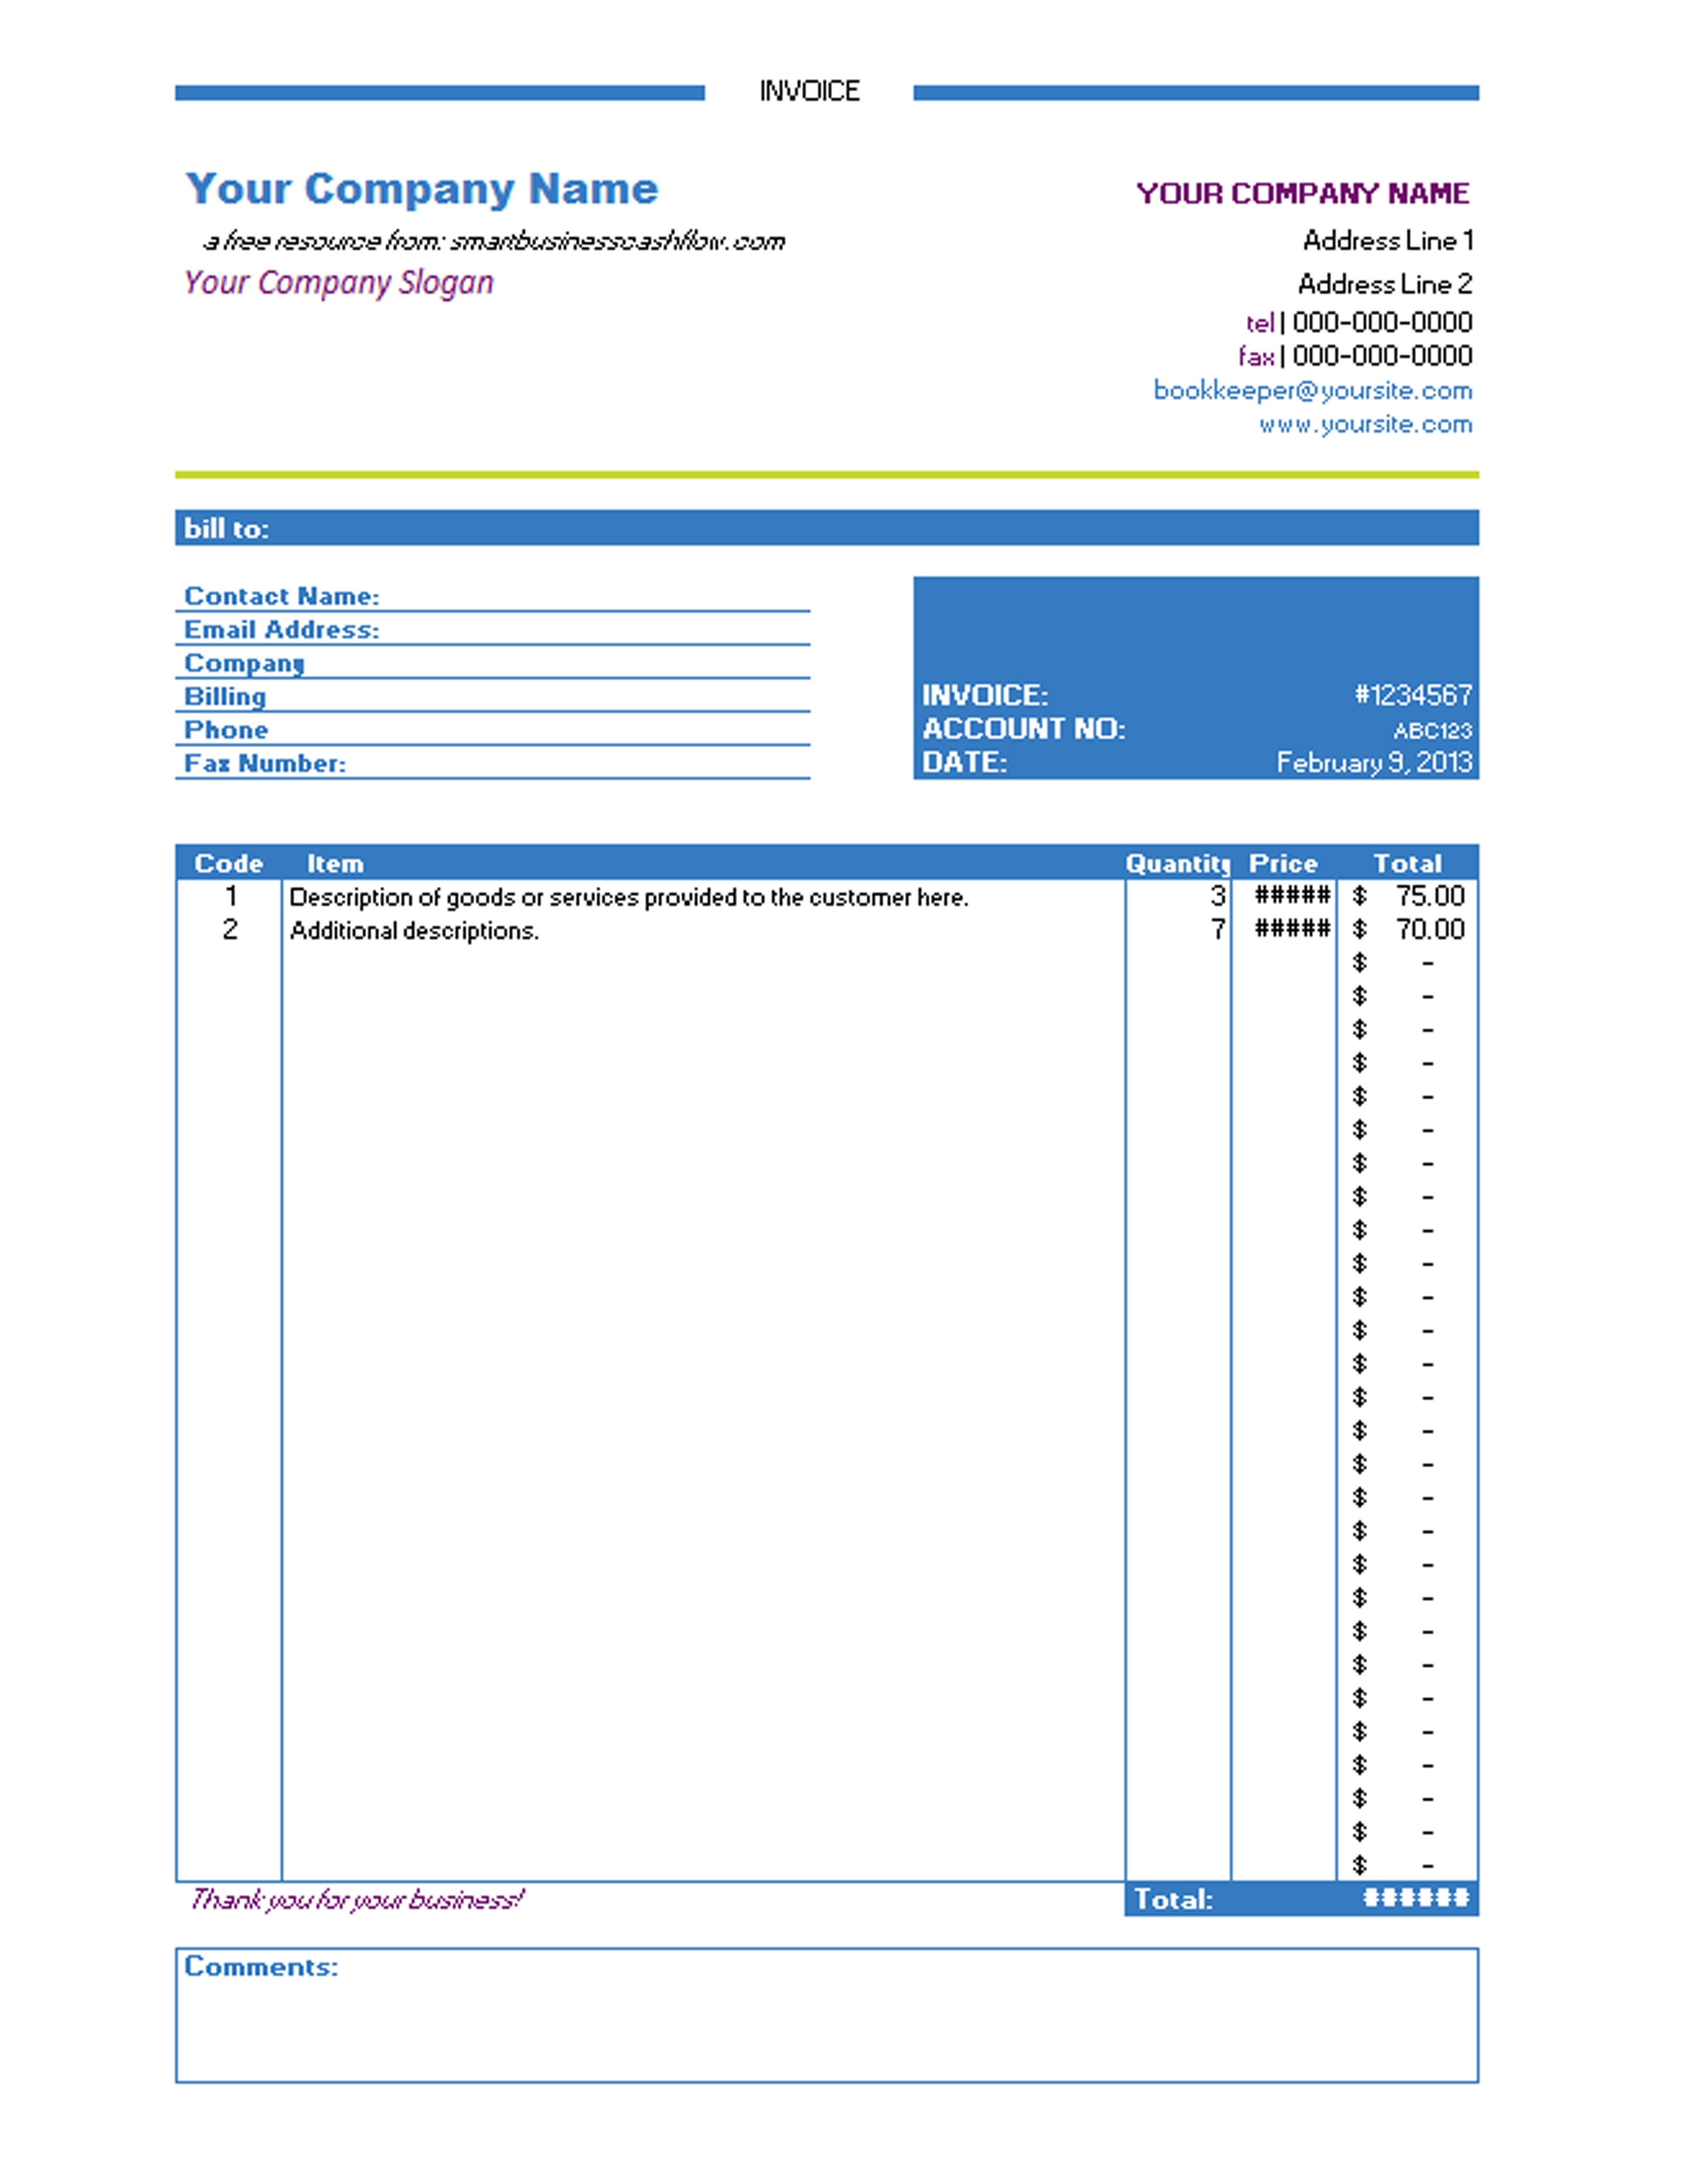 excel invoice templates free download business plan template free excel invoice